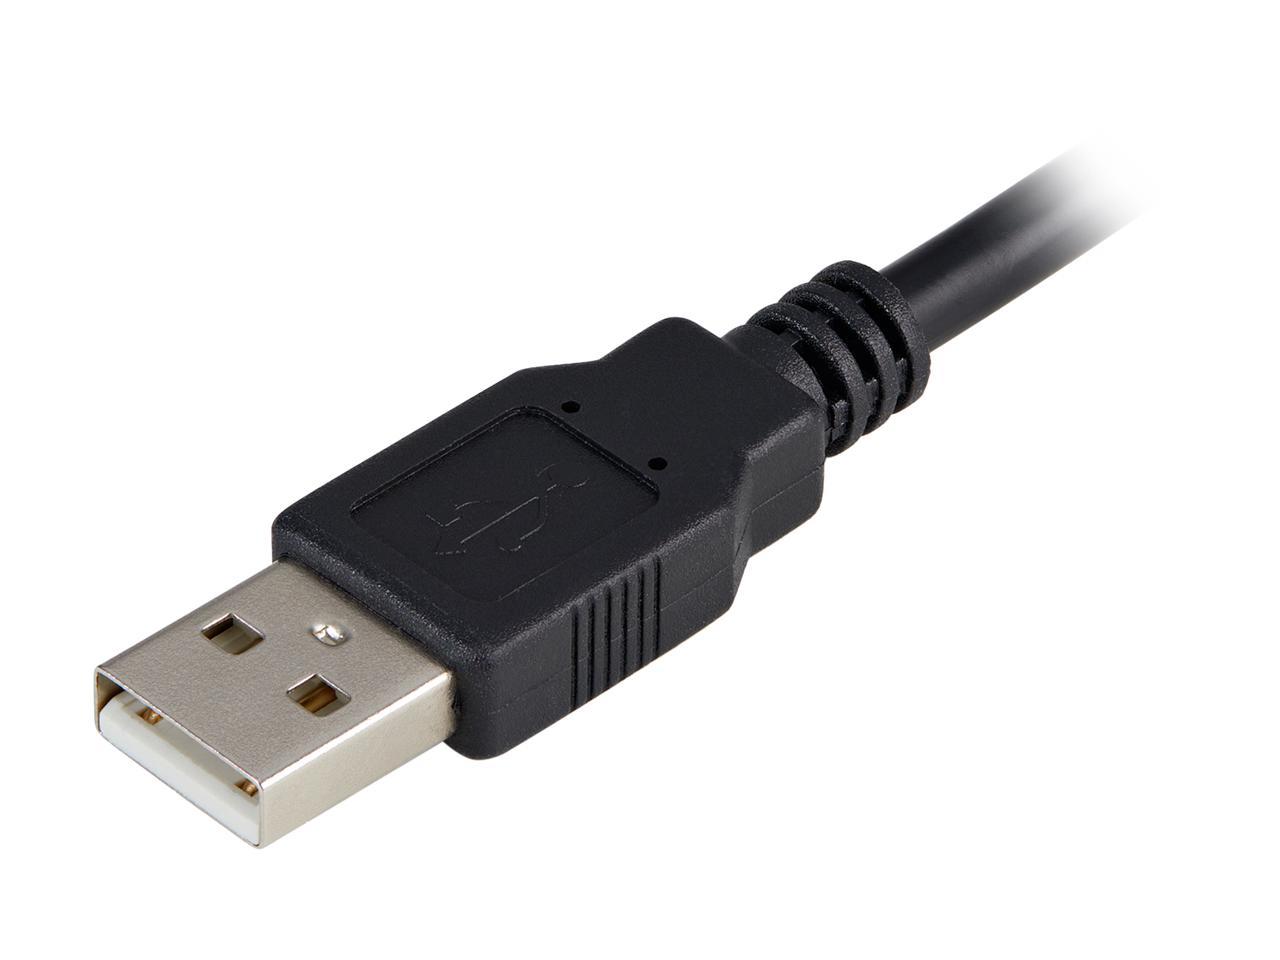 StarTech.com USB to Serial Adapter - 1 port - USB Powered - FTDI USB UART Chip - DB9 (9-pin) - USB to RS232 Adapter - image 3 of 5